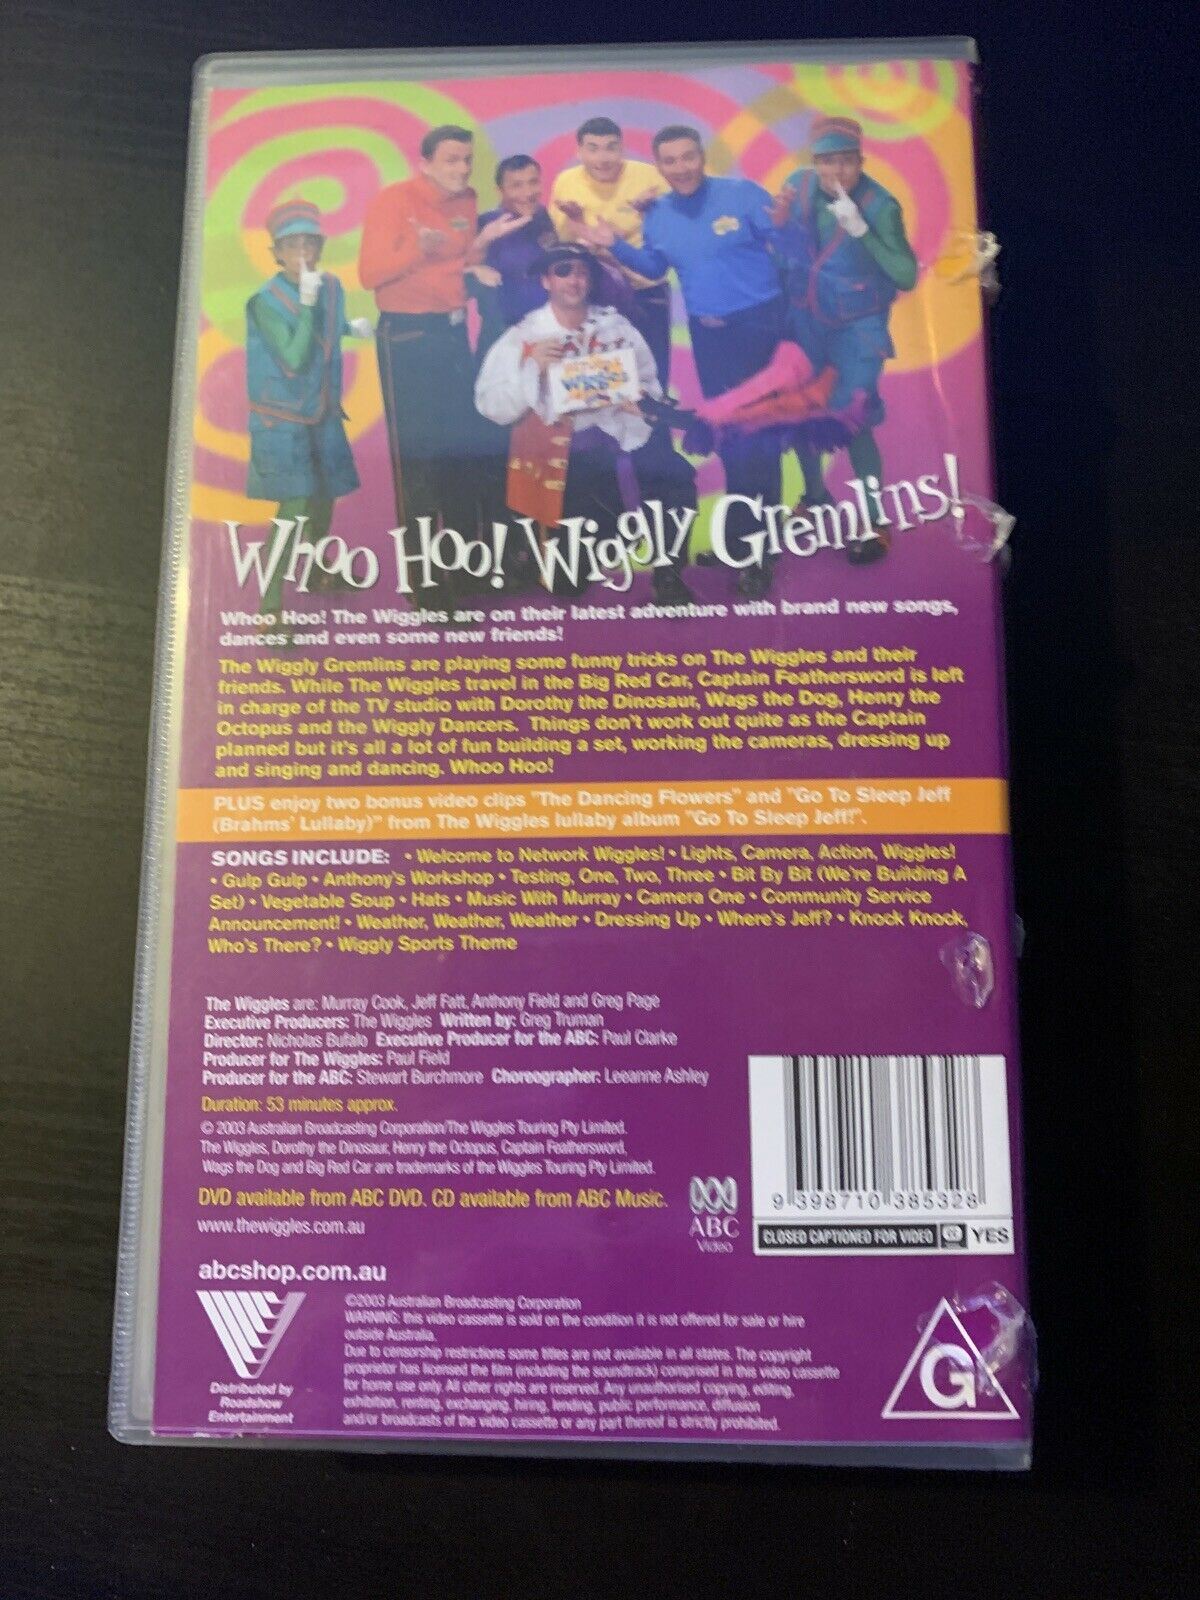 The Wiggles - Whoo Hoo! Wiggly Gremlins! (VHS, 2003) PAL